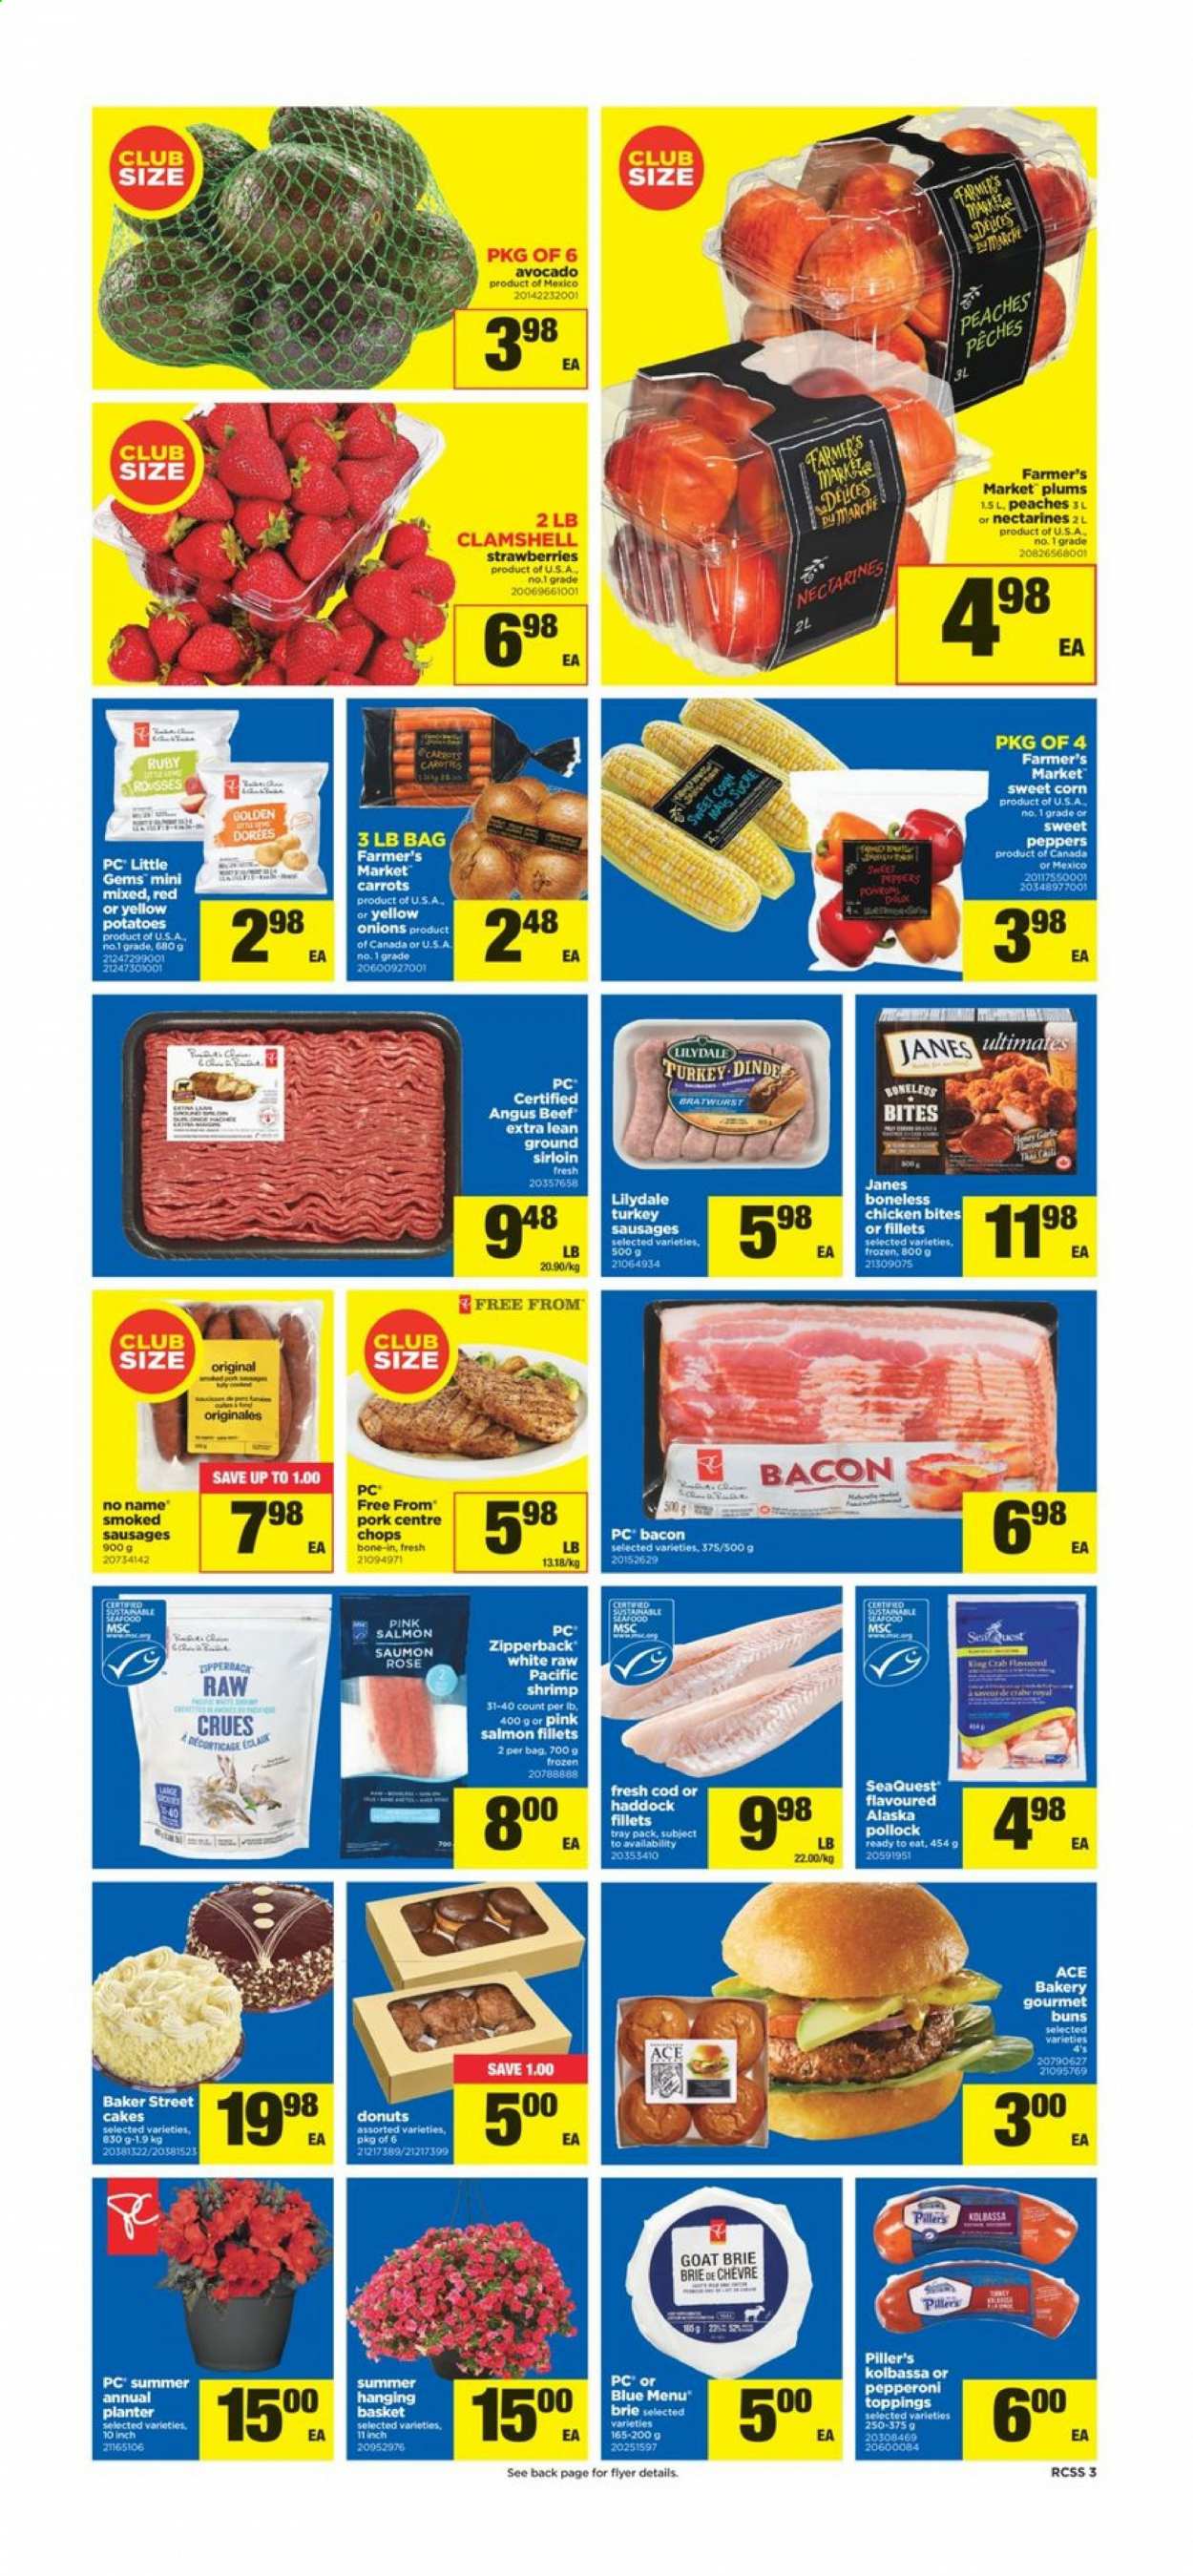 thumbnail - Real Canadian Superstore Flyer - July 08, 2021 - July 14, 2021 - Sales products - cake, buns, ACE Bakery, donut, carrots, corn, potatoes, onion, sweet corn, avocado, nectarines, strawberries, plums, peaches, cod, salmon, salmon fillet, haddock, king crab, pollock, seafood, crab, shrimps, No Name, bacon, bratwurst, sausage, pepperoni, brie, chicken bites, wine, rosé wine, beef meat, rose. Page 3.